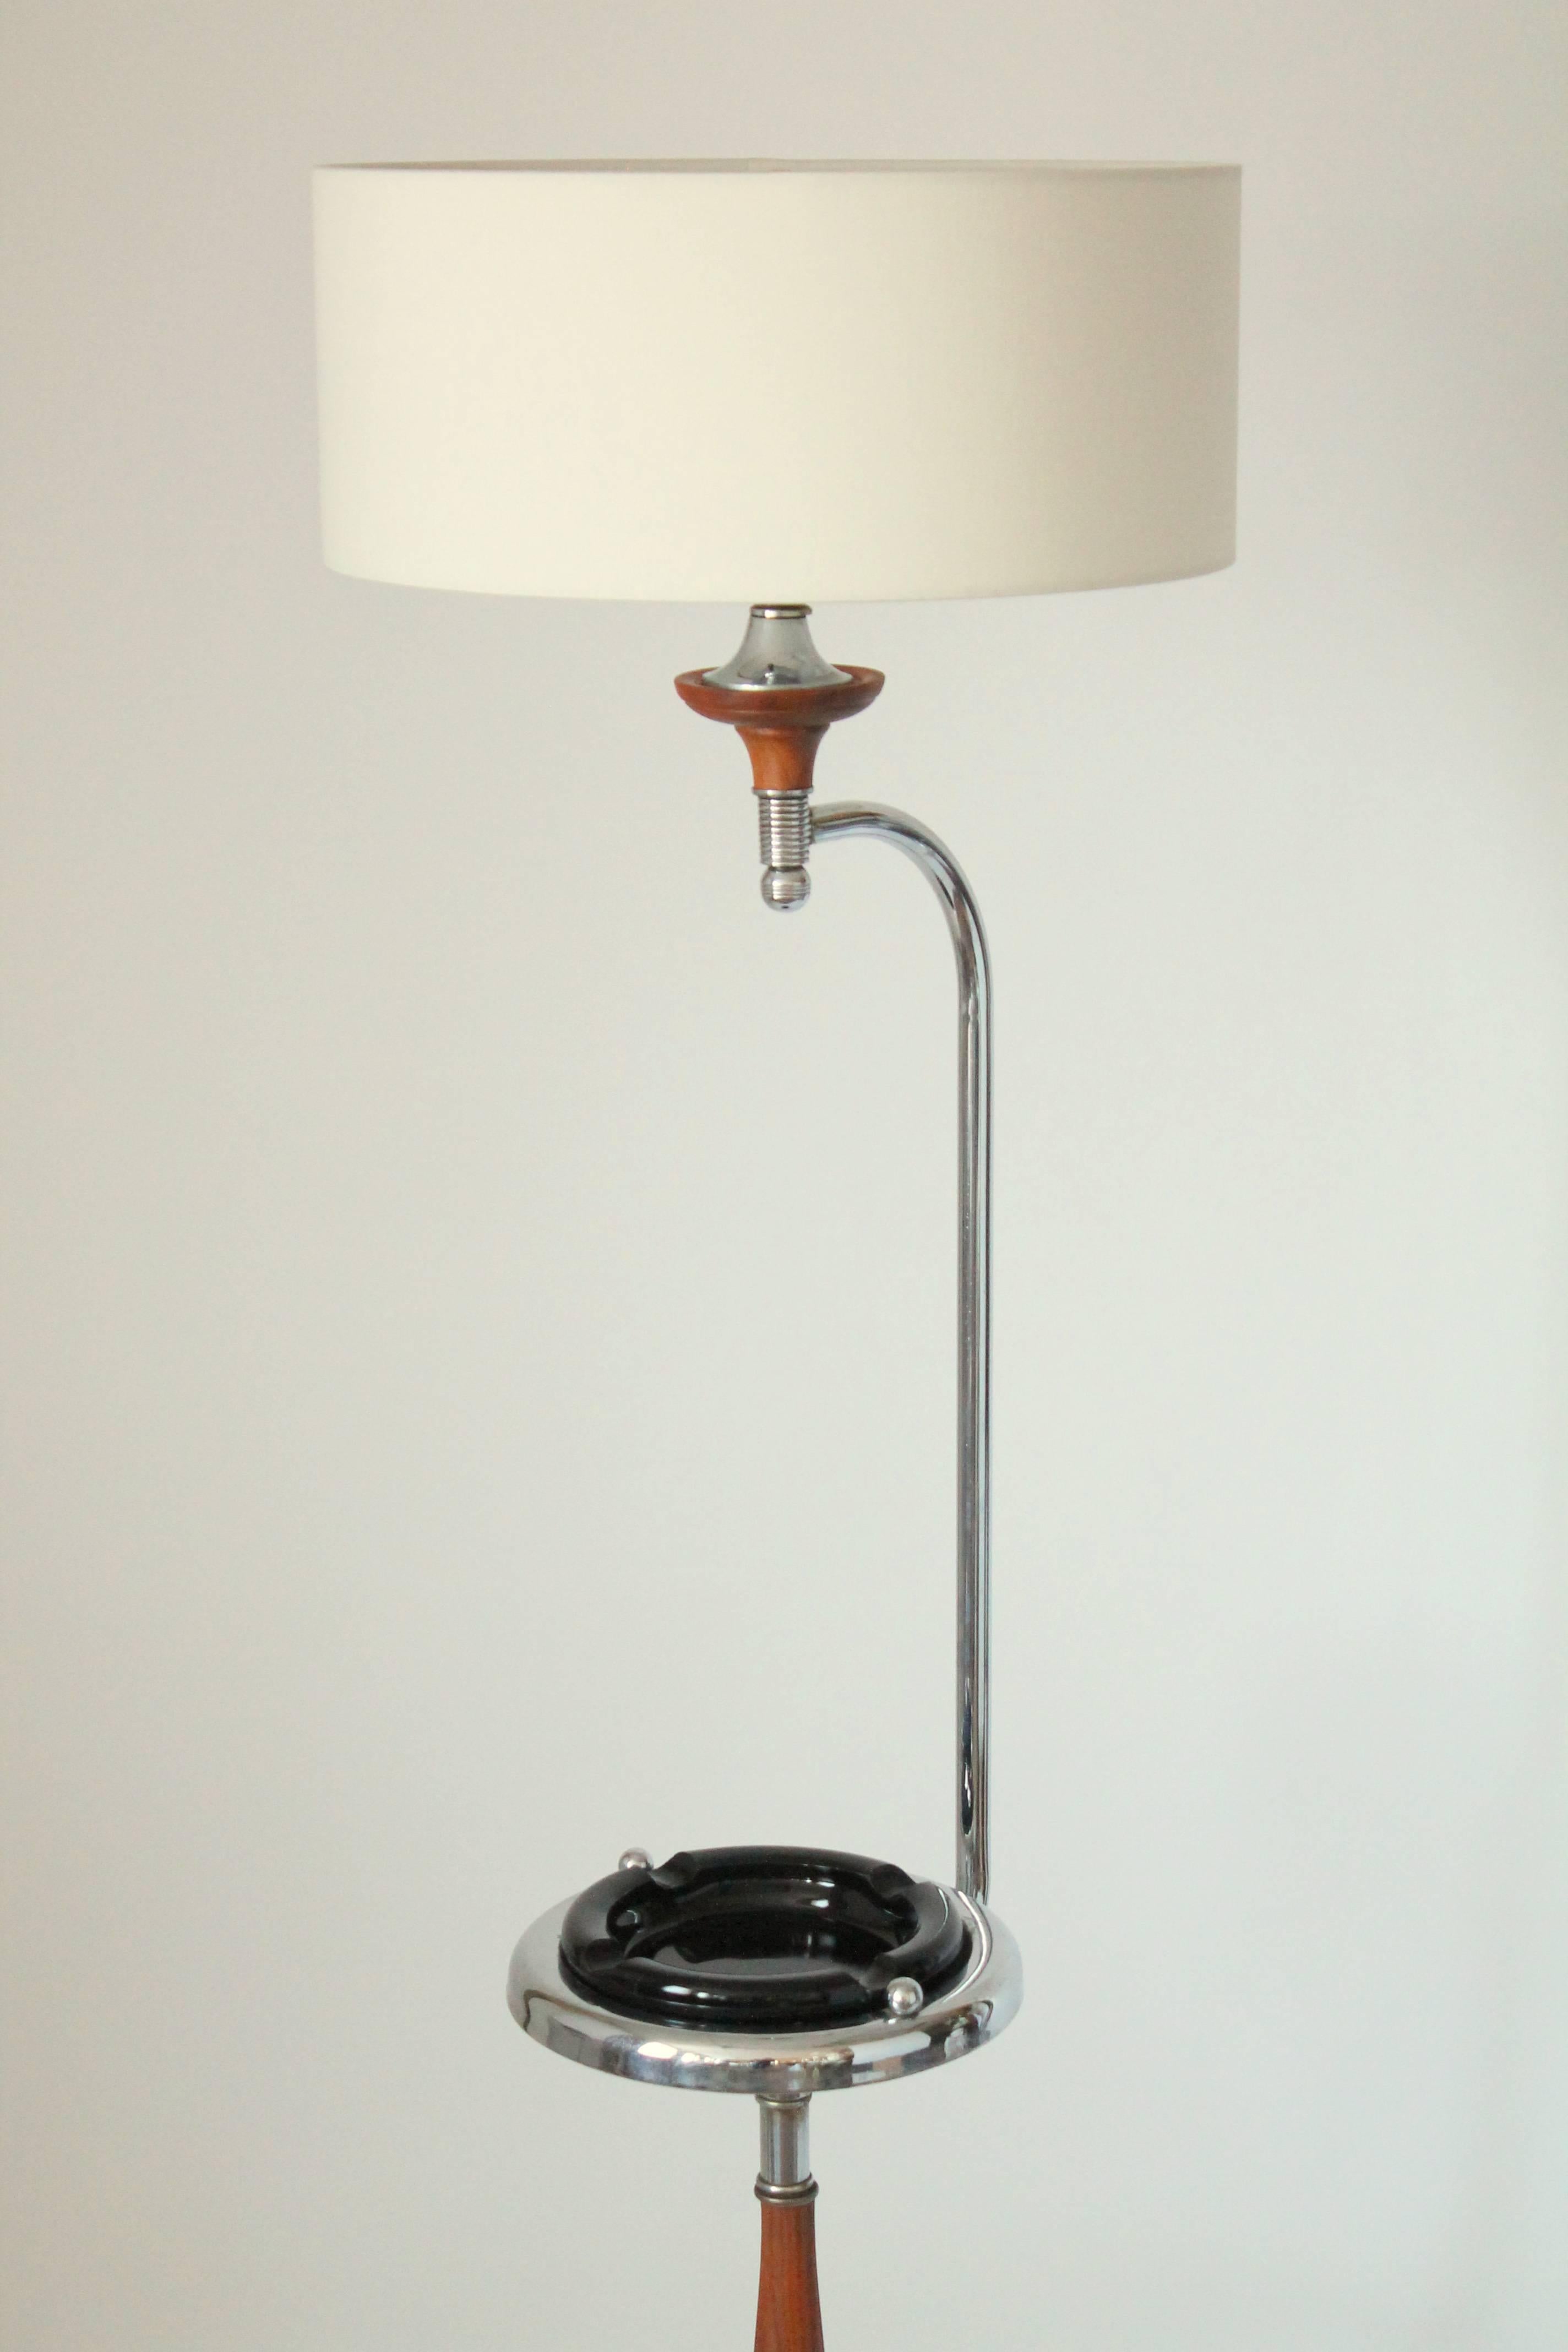 vintage floor lamp with ashtray